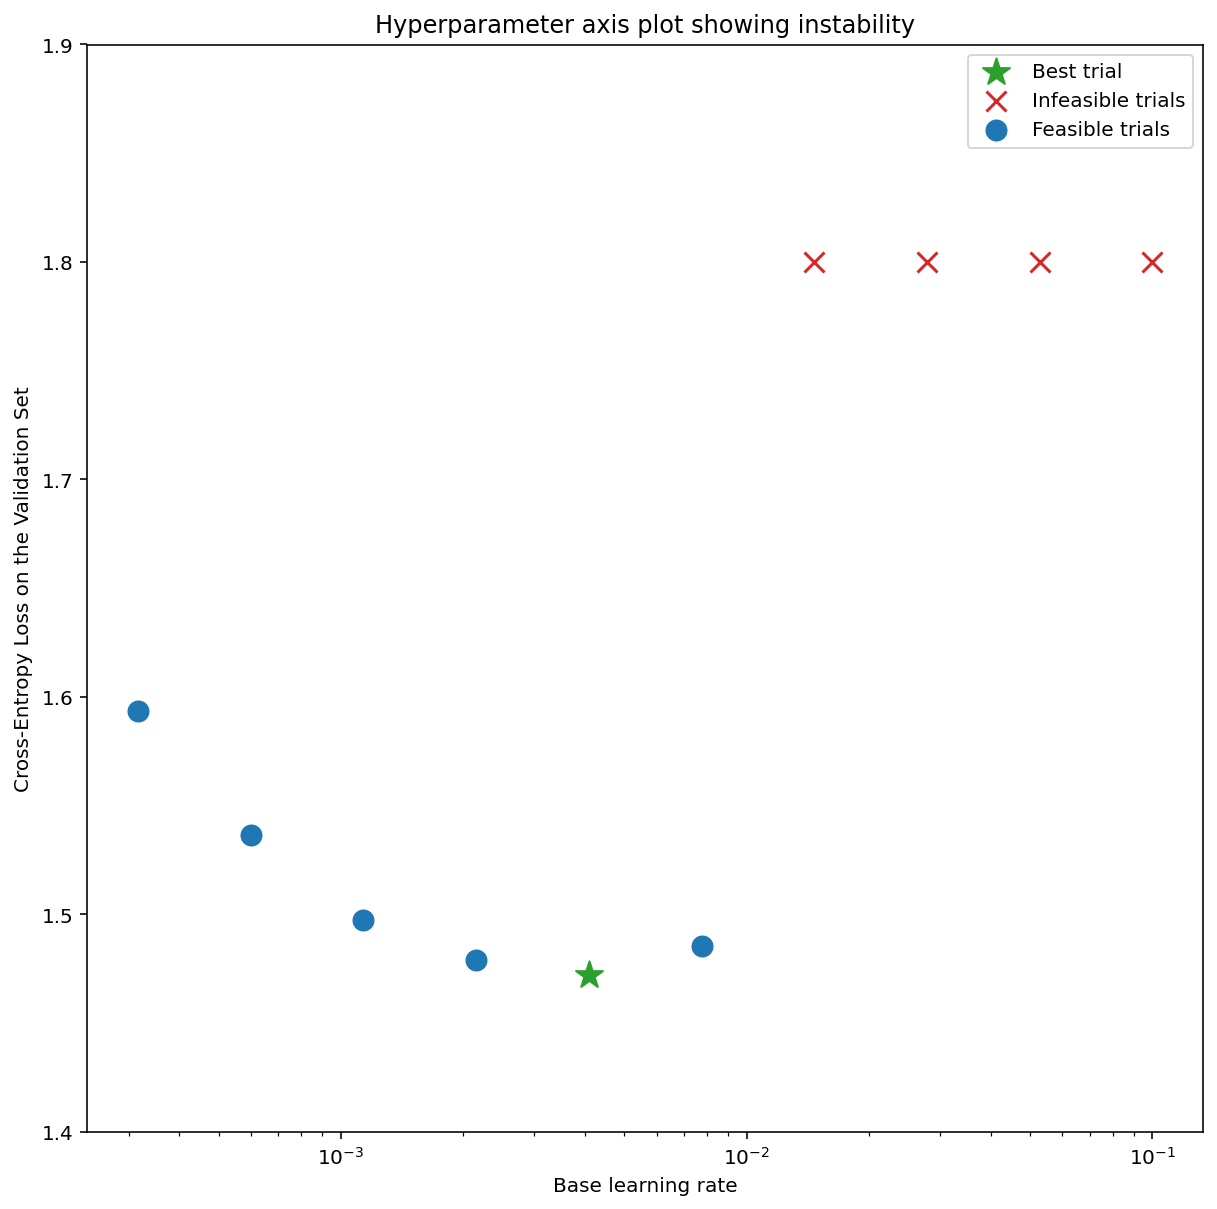 Graph of cross-entropy loss on the validation set (y-axis) vs.
            Base learning rate (x-axis). The graph shows six feasible trials,
            all of which have a relatively low Base learning rate. Validation
            loss drops as base learning rate increases, then hits a low point
            before starting to increase. The graph also shows four infeasible
            trials, all of which have a relatively high Base learning rate.